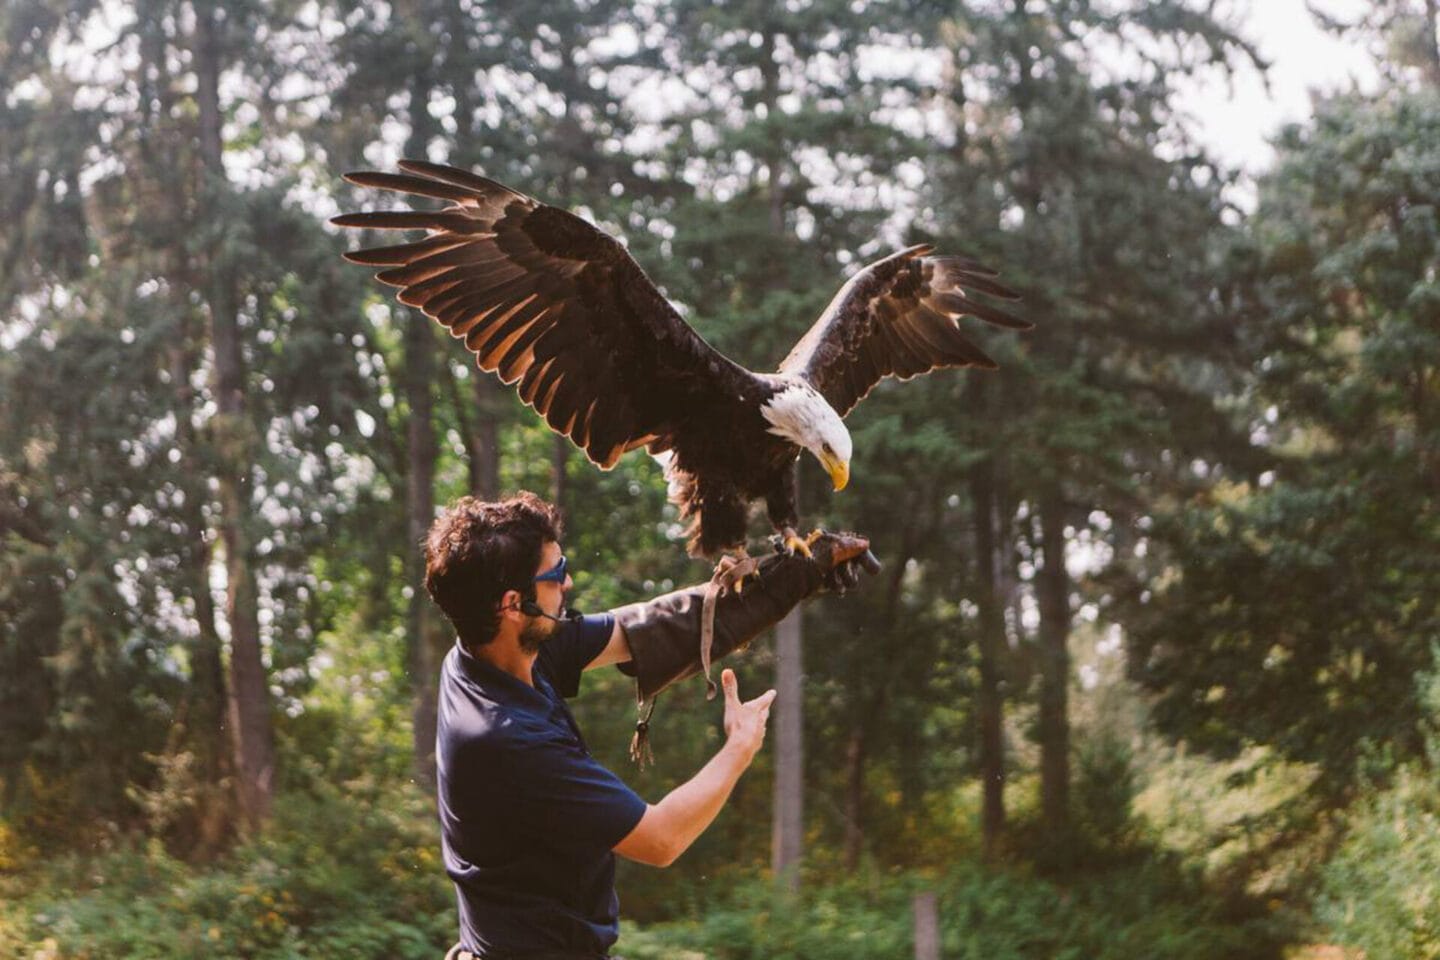 Fun things to do in Cowichan Valley - The Raptors